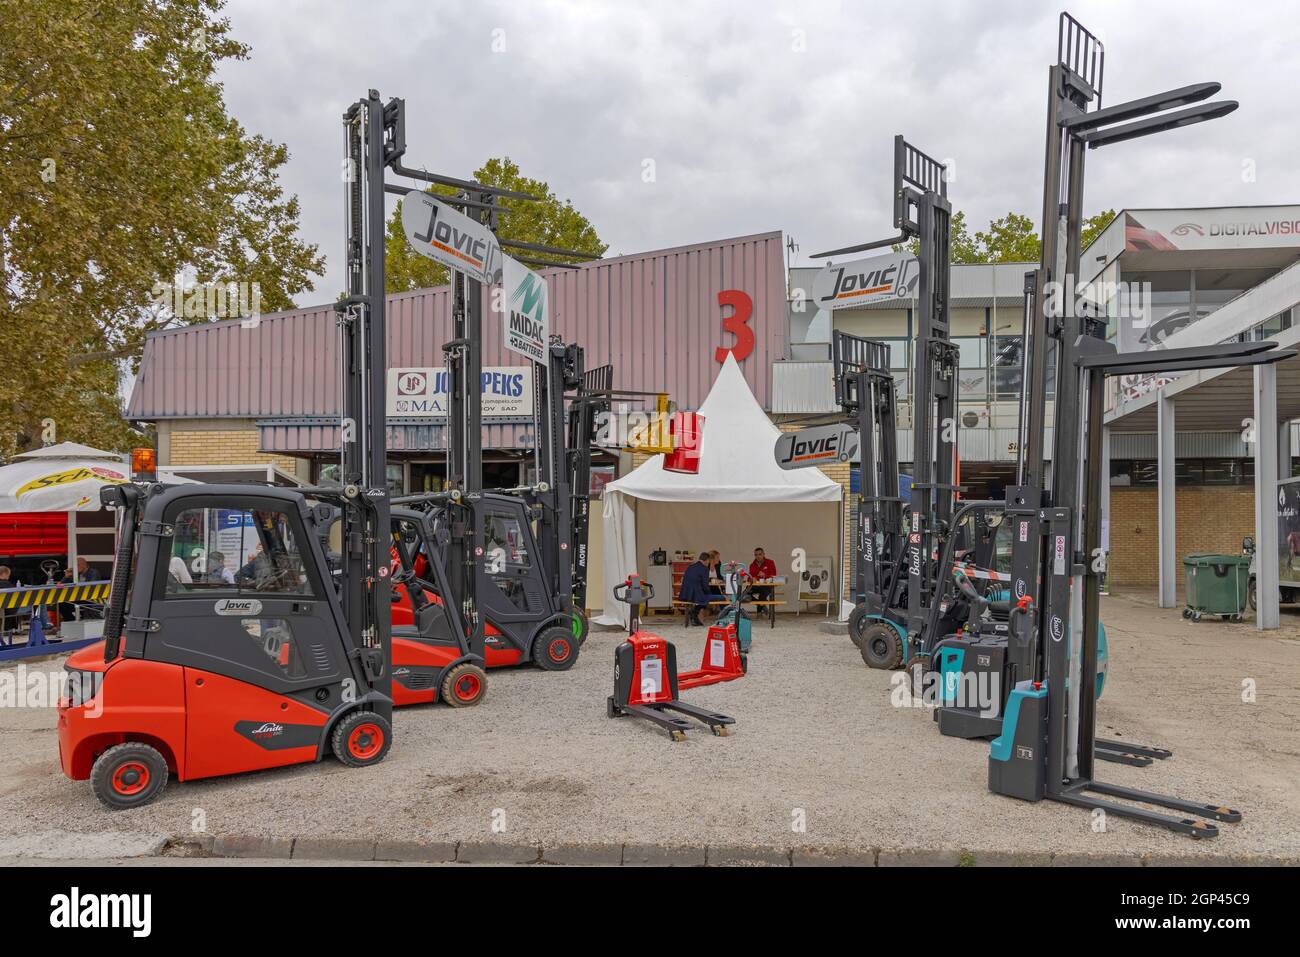 Novi Sad, Serbia - September 21, 2021: Baoli and Linde Forklifts Equipment at Agriculture Expo Show Jovic Company Booth. Stock Photo